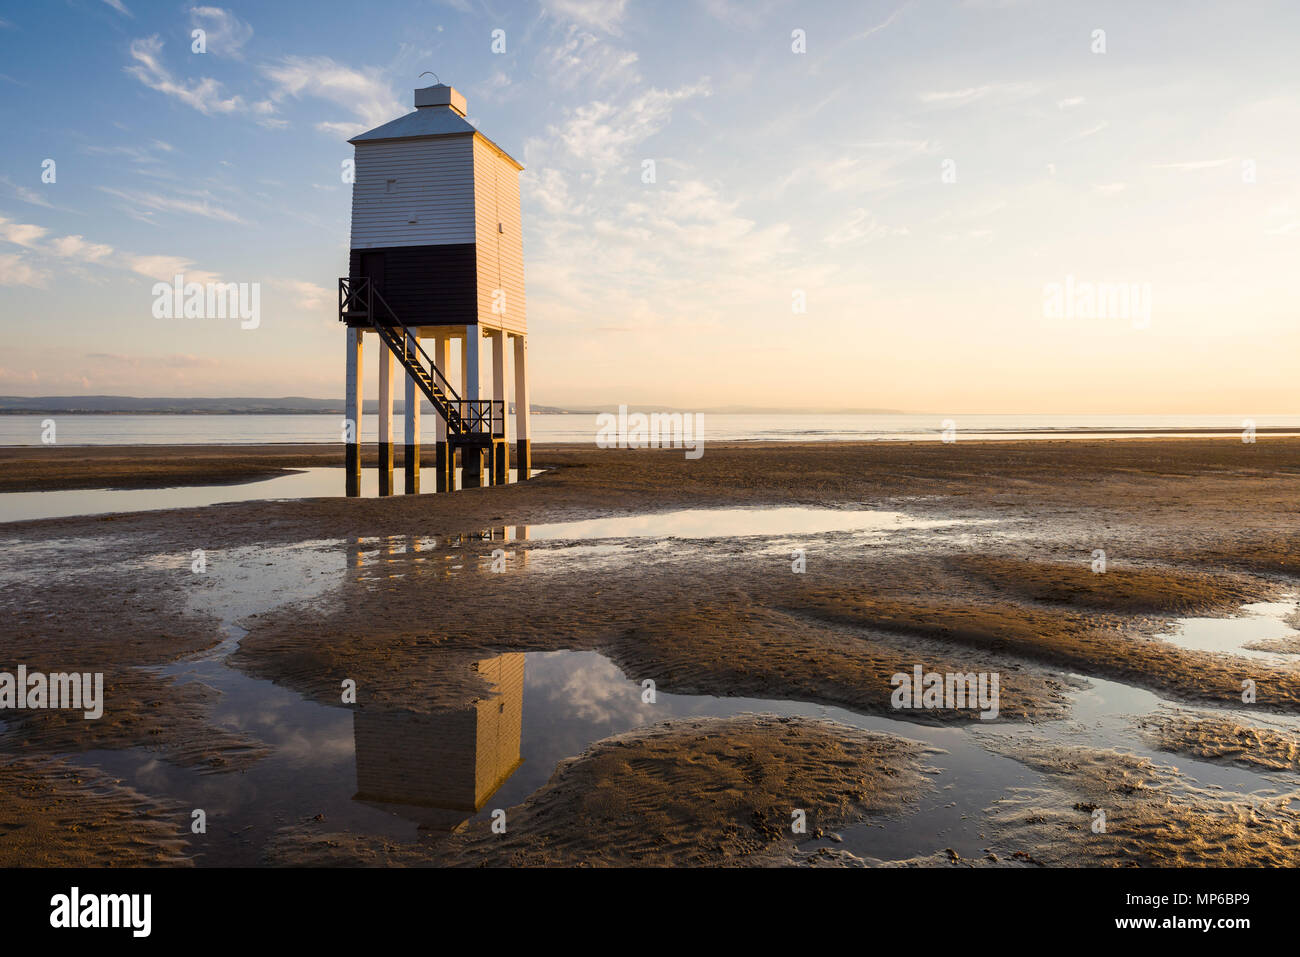 The Low Lighthouse on the beach at Burnham-on-Sea overlooking Bridgwater Bay. Somerset, England. Stock Photo